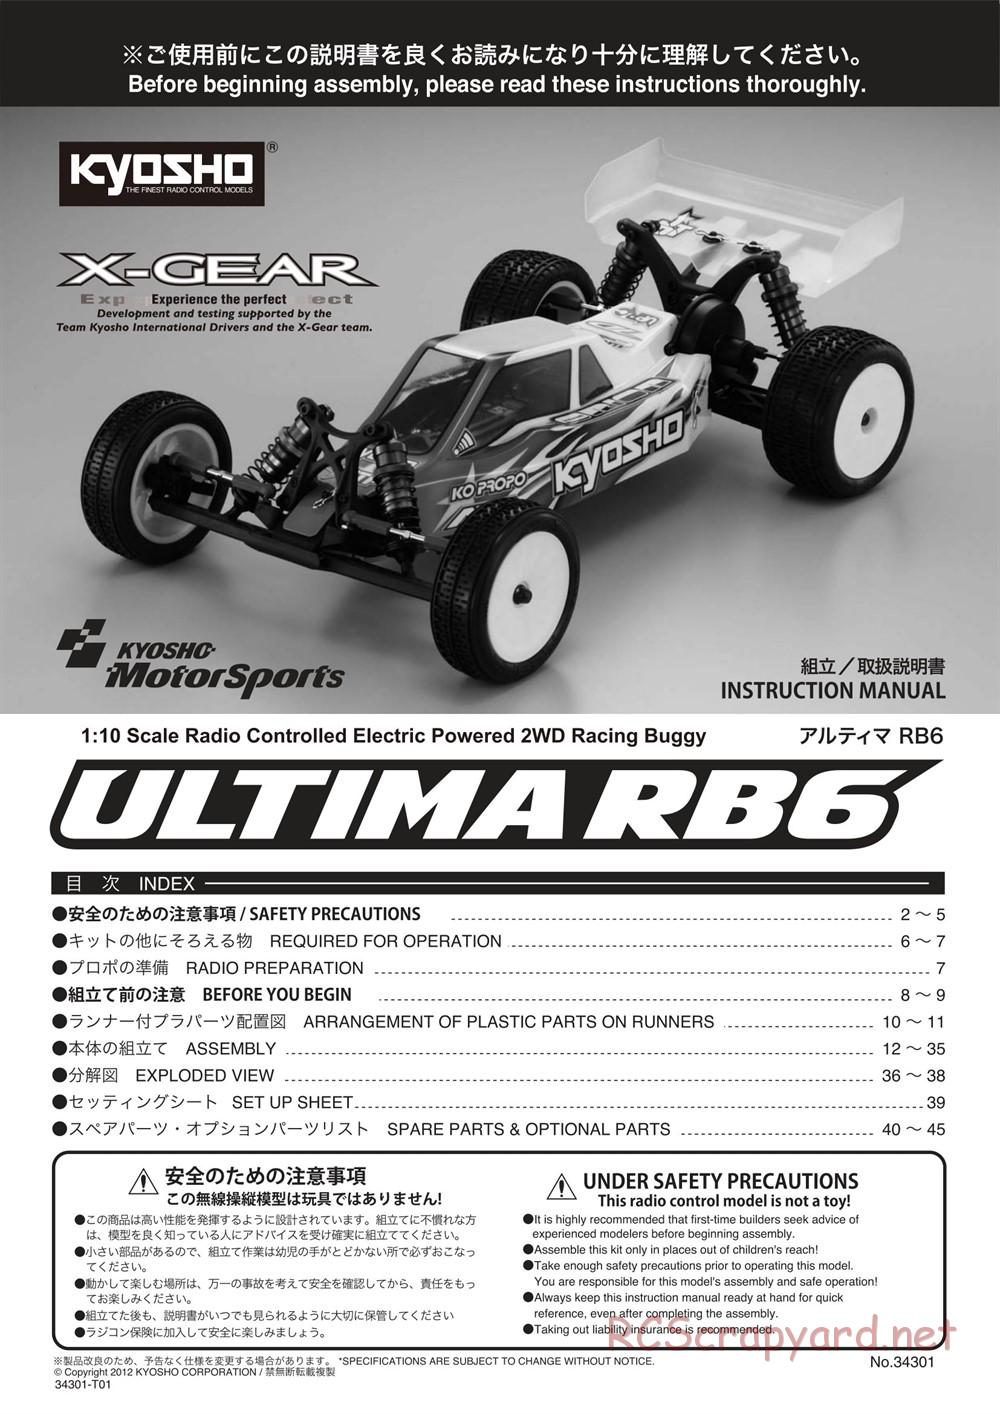 Kyosho - Ultima RB6 (2015) - Manual - Page 1